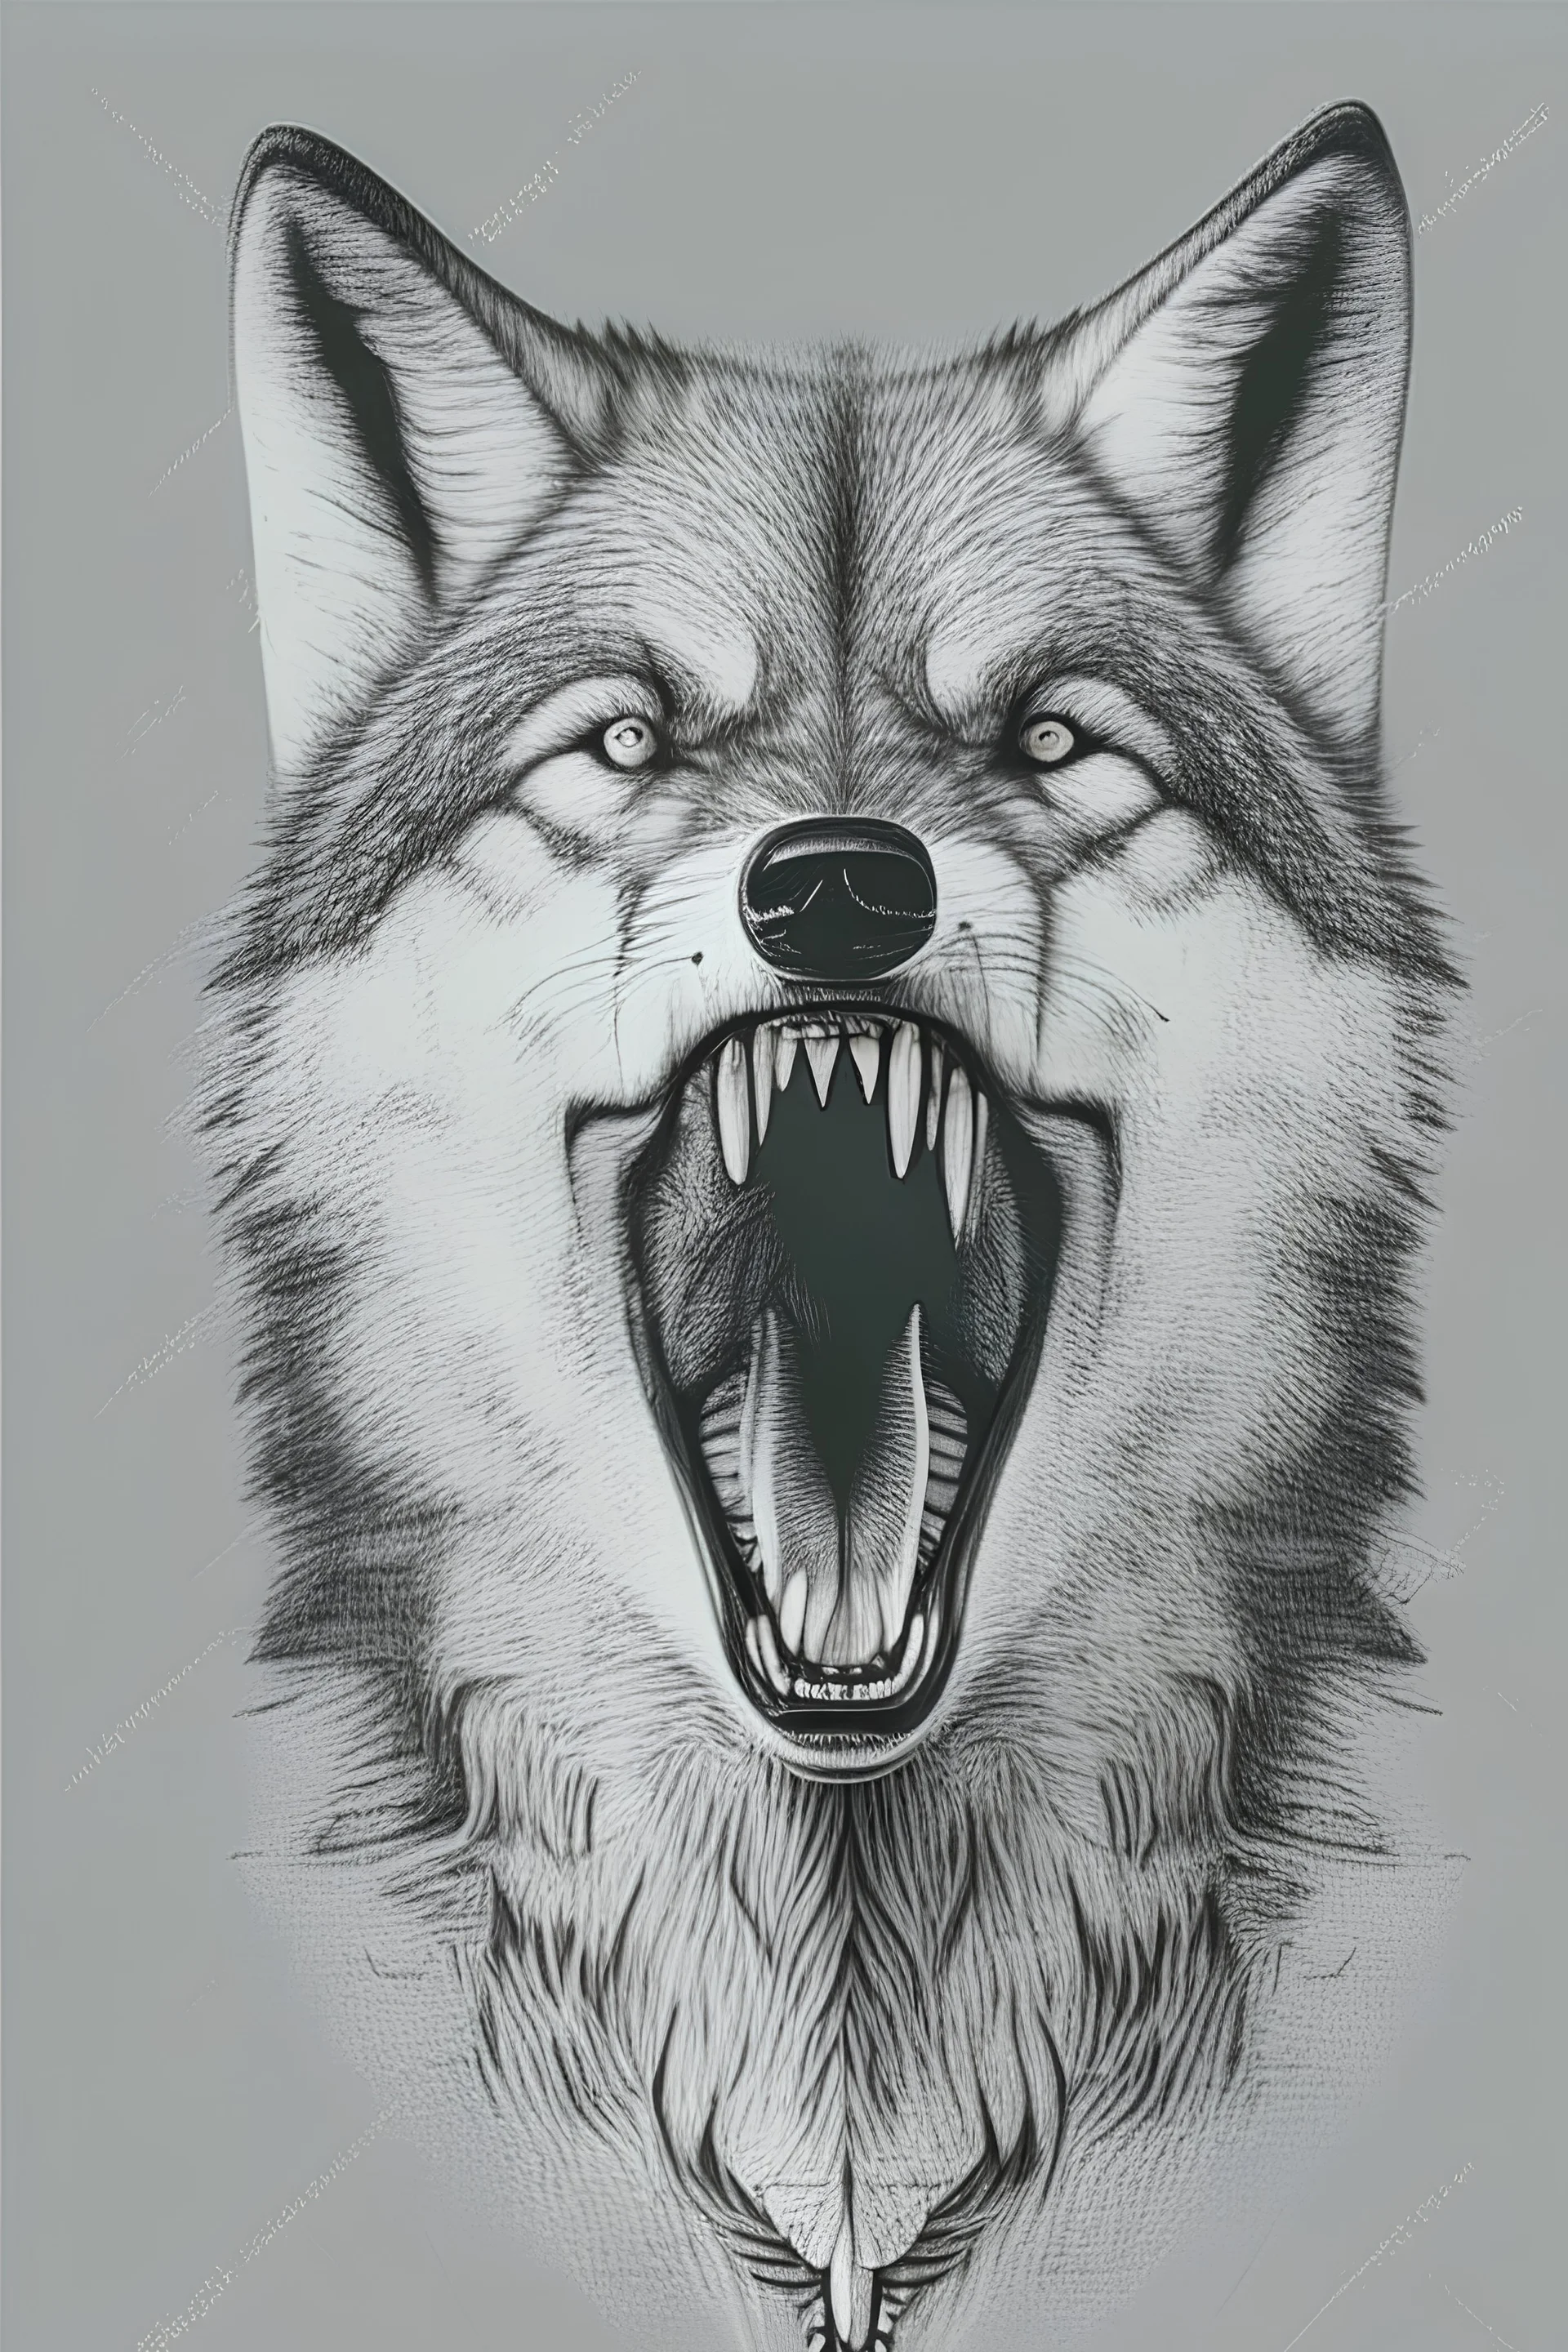 How to Draw a Wolf Face - YouTube